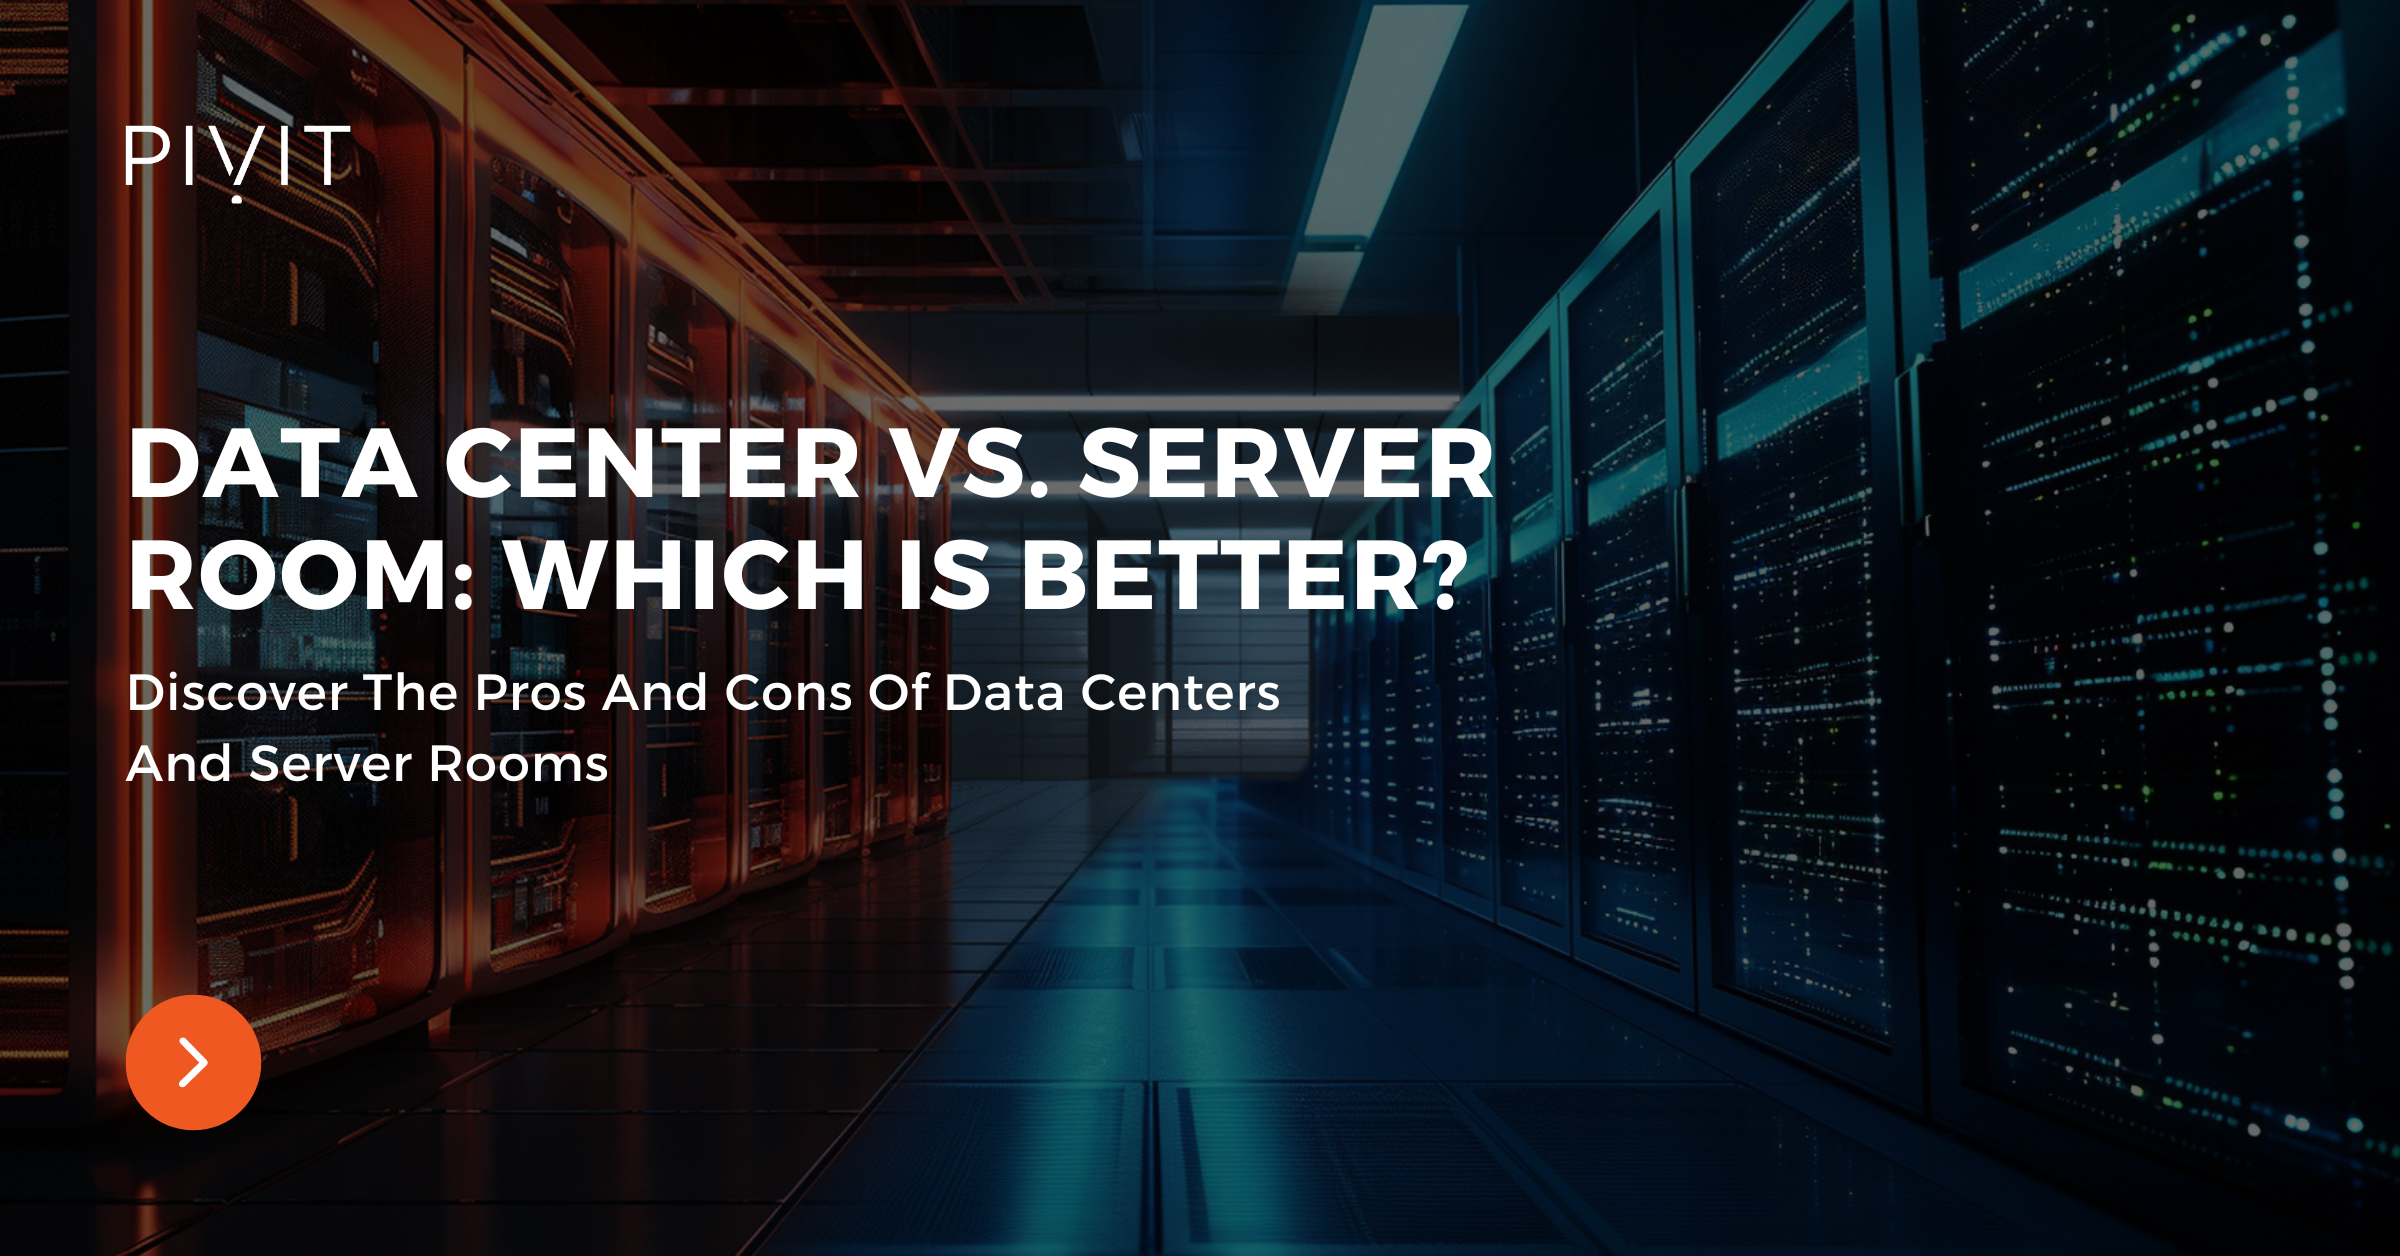 Data Center Vs. Server Room: Which Is Better? - Discover The Pros And Cons Of Data Centers And Server Rooms